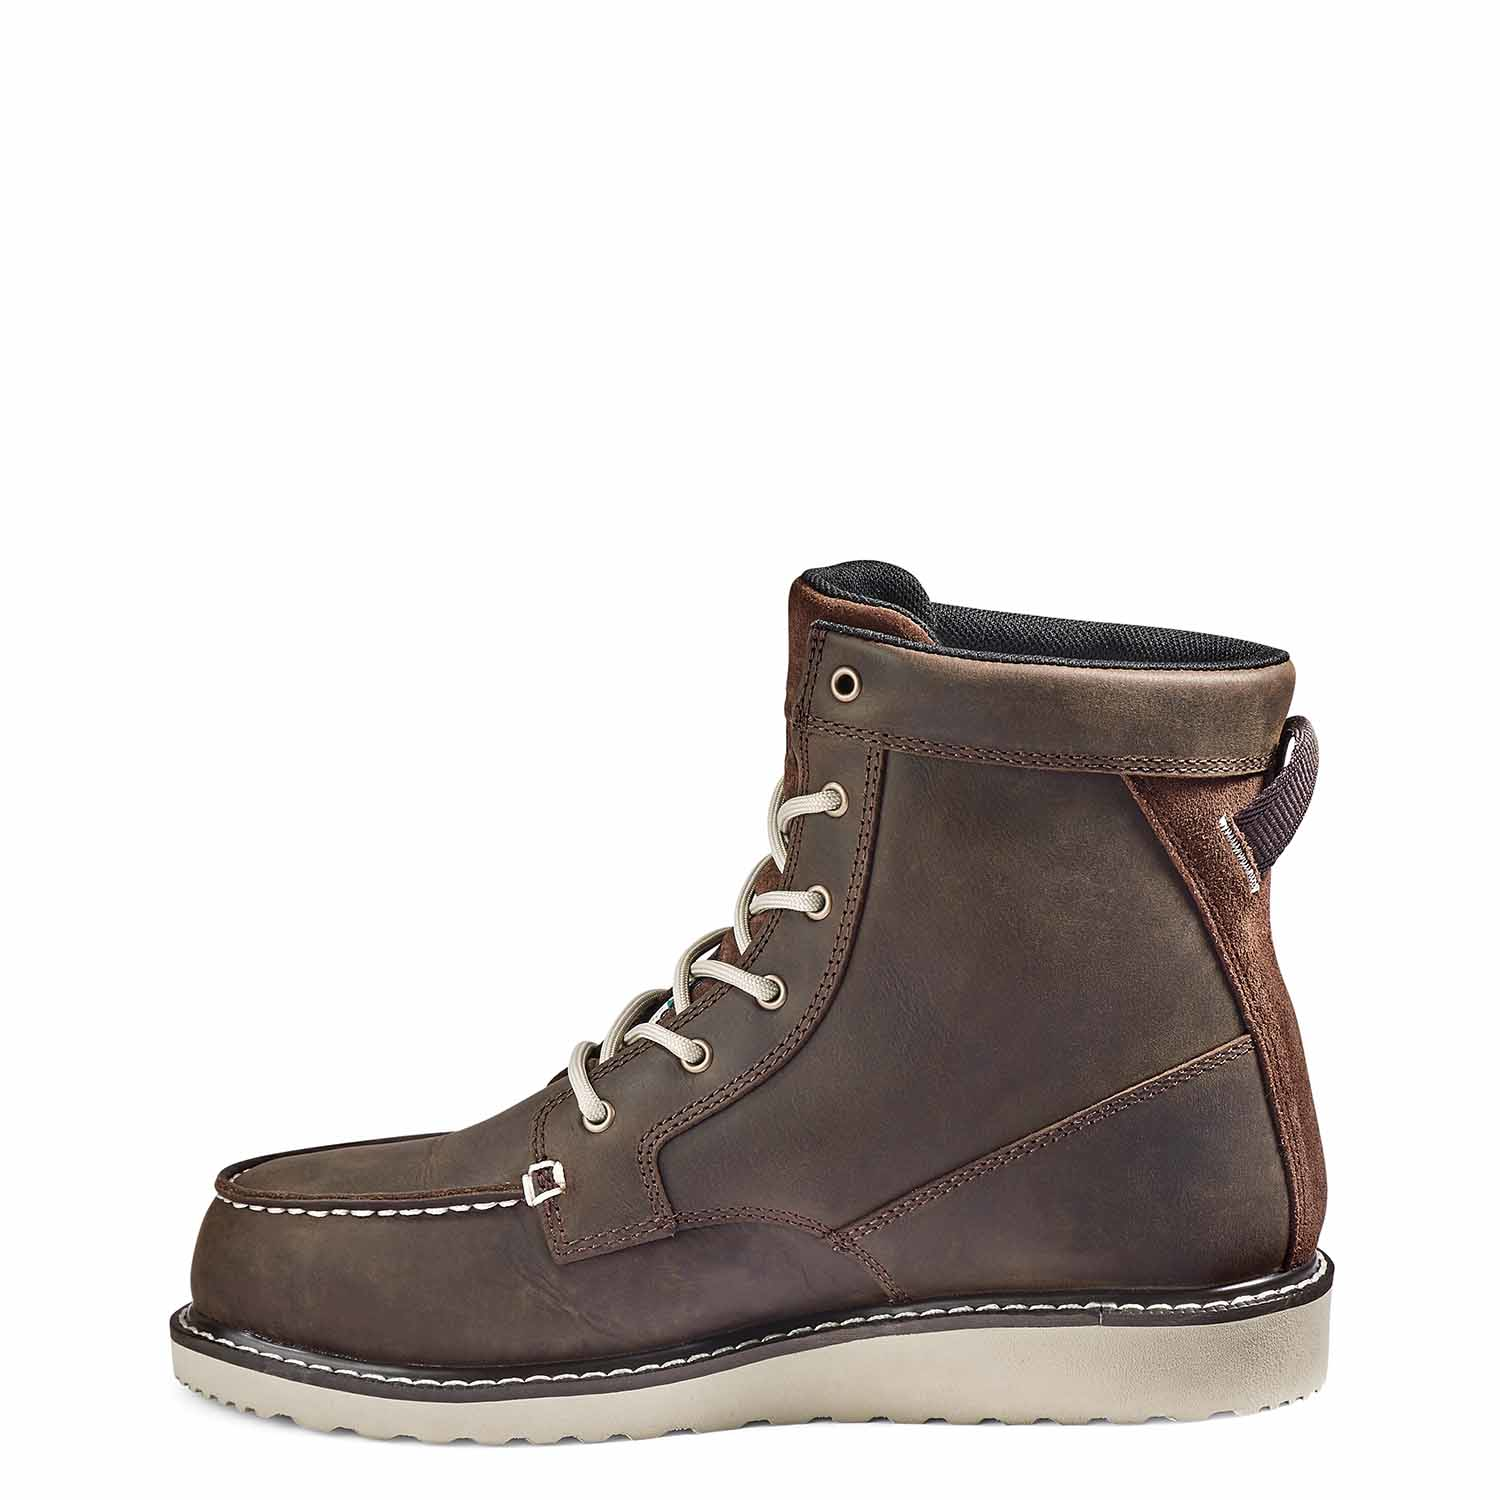 CAT: UTAH (Brown) Safety Boots The Whitby Cobbler, 44% OFF